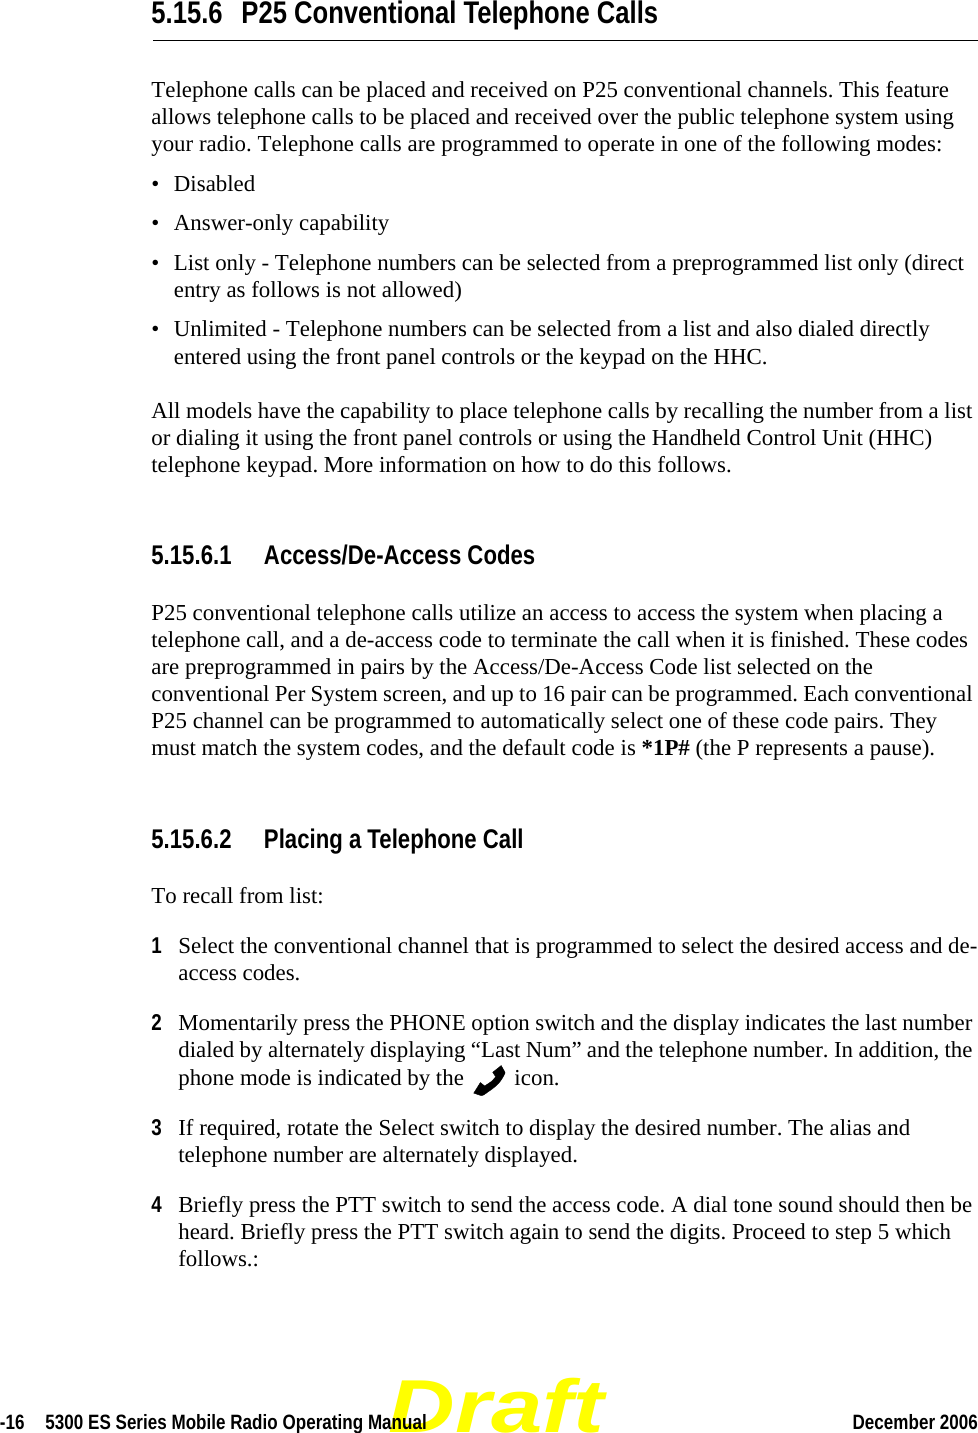 Draft-16  5300 ES Series Mobile Radio Operating Manual December 2006 5.15.6 P25 Conventional Telephone CallsTelephone calls can be placed and received on P25 conventional channels. This feature allows telephone calls to be placed and received over the public telephone system using your radio. Telephone calls are programmed to operate in one of the following modes:• Disabled• Answer-only capability• List only - Telephone numbers can be selected from a preprogrammed list only (direct entry as follows is not allowed)• Unlimited - Telephone numbers can be selected from a list and also dialed directly entered using the front panel controls or the keypad on the HHC.All models have the capability to place telephone calls by recalling the number from a list or dialing it using the front panel controls or using the Handheld Control Unit (HHC) telephone keypad. More information on how to do this follows.5.15.6.1 Access/De-Access CodesP25 conventional telephone calls utilize an access to access the system when placing a telephone call, and a de-access code to terminate the call when it is finished. These codes are preprogrammed in pairs by the Access/De-Access Code list selected on the conventional Per System screen, and up to 16 pair can be programmed. Each conventional P25 channel can be programmed to automatically select one of these code pairs. They must match the system codes, and the default code is *1P# (the P represents a pause).5.15.6.2 Placing a Telephone CallTo recall from list:1Select the conventional channel that is programmed to select the desired access and de-access codes.2Momentarily press the PHONE option switch and the display indicates the last number dialed by alternately displaying “Last Num” and the telephone number. In addition, the phone mode is indicated by the   icon.3If required, rotate the Select switch to display the desired number. The alias and telephone number are alternately displayed.4Briefly press the PTT switch to send the access code. A dial tone sound should then be heard. Briefly press the PTT switch again to send the digits. Proceed to step 5 which follows.: